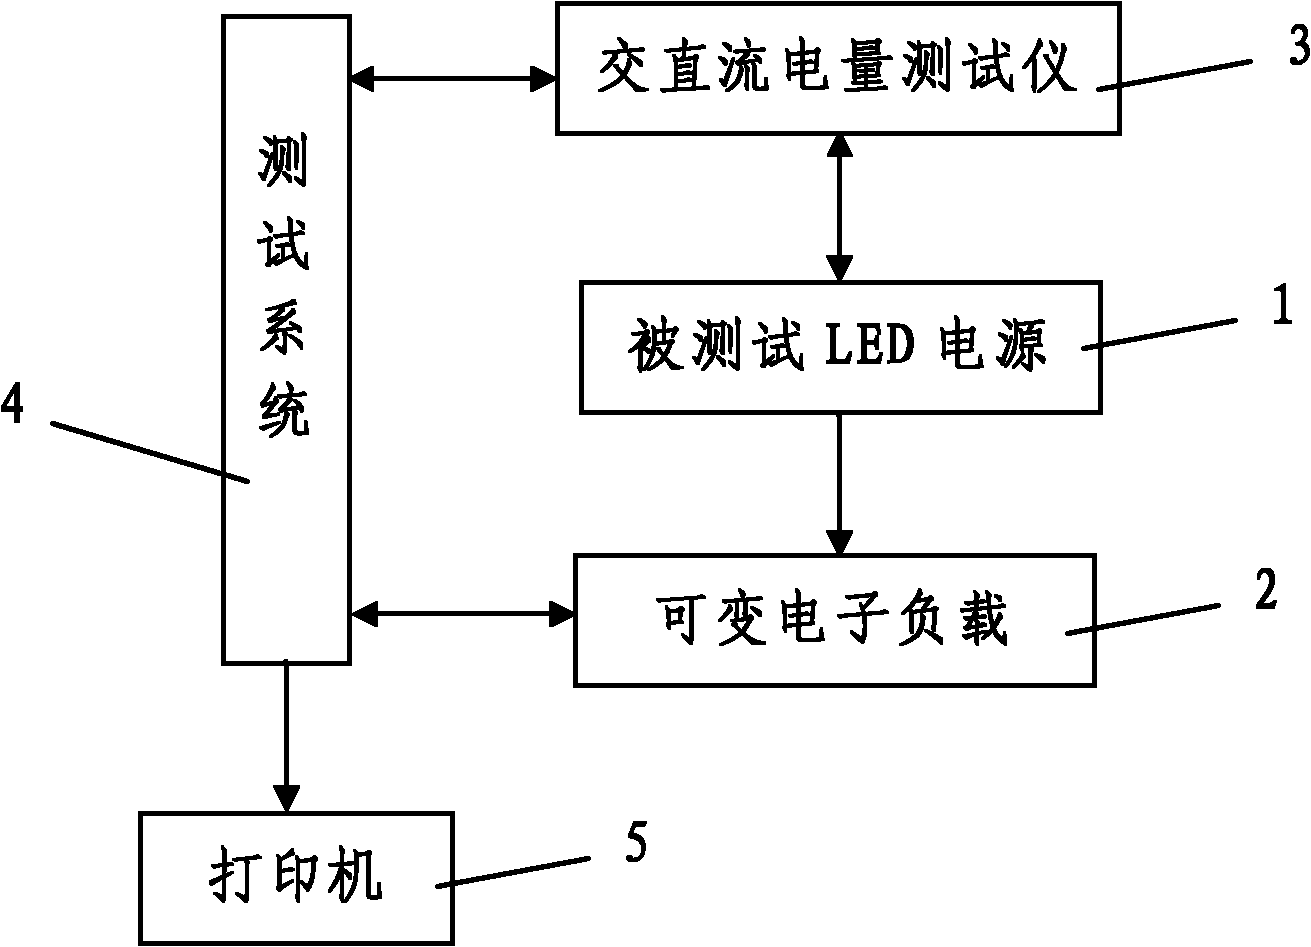 LED (light-emitting diode) power source analysis and test system